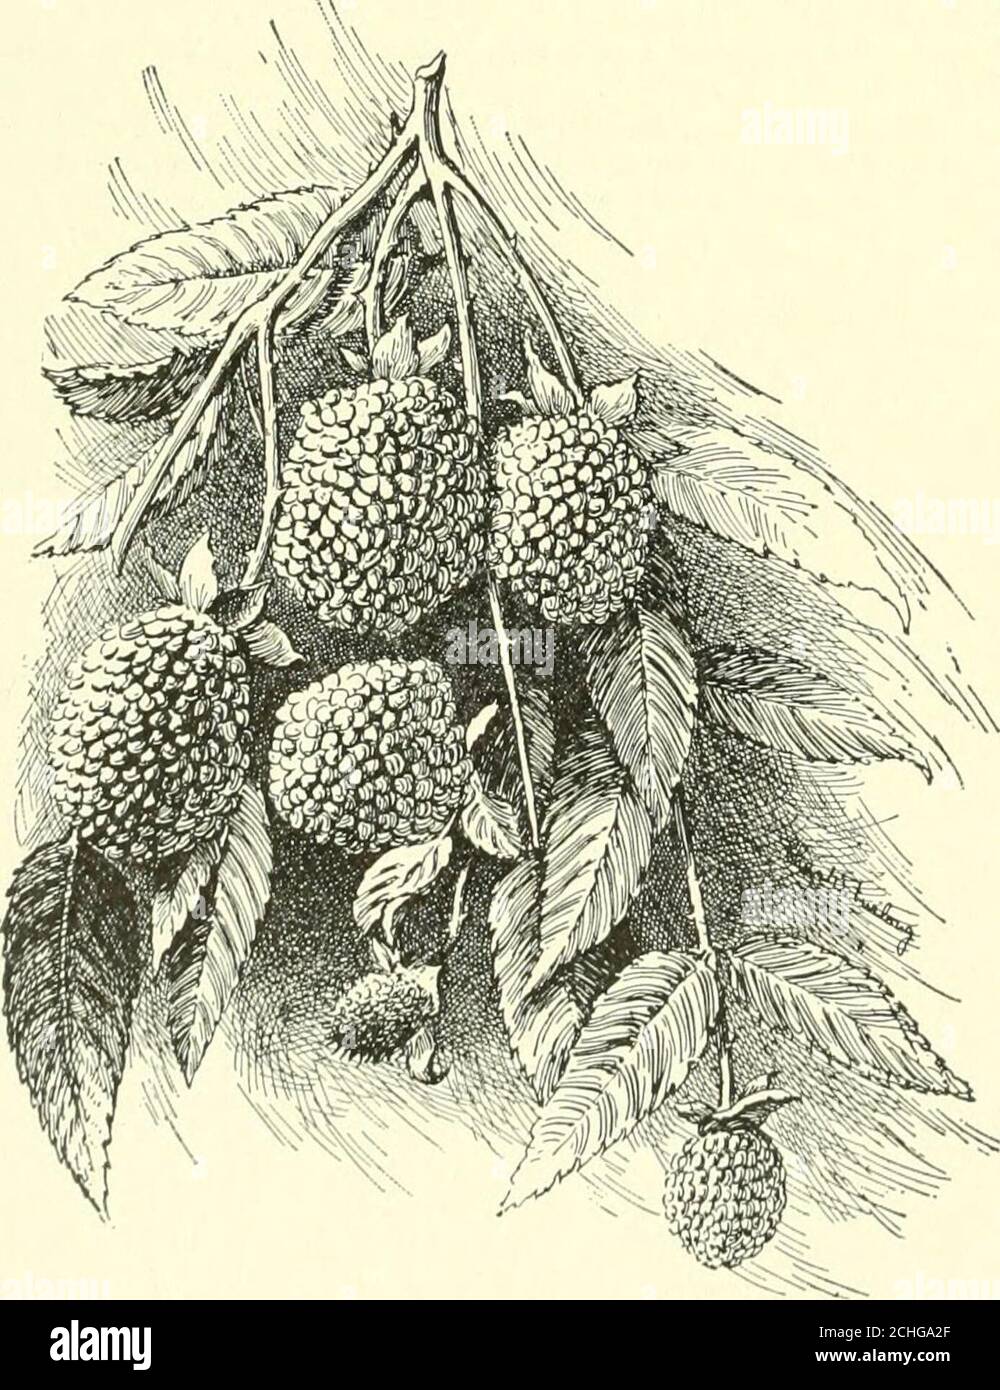 . Cyclopedia of American horticulture, comprising suggestions for cultivation of horticultural plants, descriptions of the species of fruits, vegetables, flowers and ornamental plants sold in the United States and Canada, together with geographical and biographical sketches, and a synopsis of the vegetable kingdom . 2197. Rubus rosaefolius tX &gt;$).Sometimes known ;is Strawberry-raspberry. 2198. Rubus phsnicolasius (X!3^). No. 13. as Ohio, Gregg, etc. Var. pdllidus has amber-yellowfr.; sometimes found in the wild. Var. leucodermis, Card (B. leucodirmis Dougl.).Lfts. more coarsely dentate-serr Stock Photo